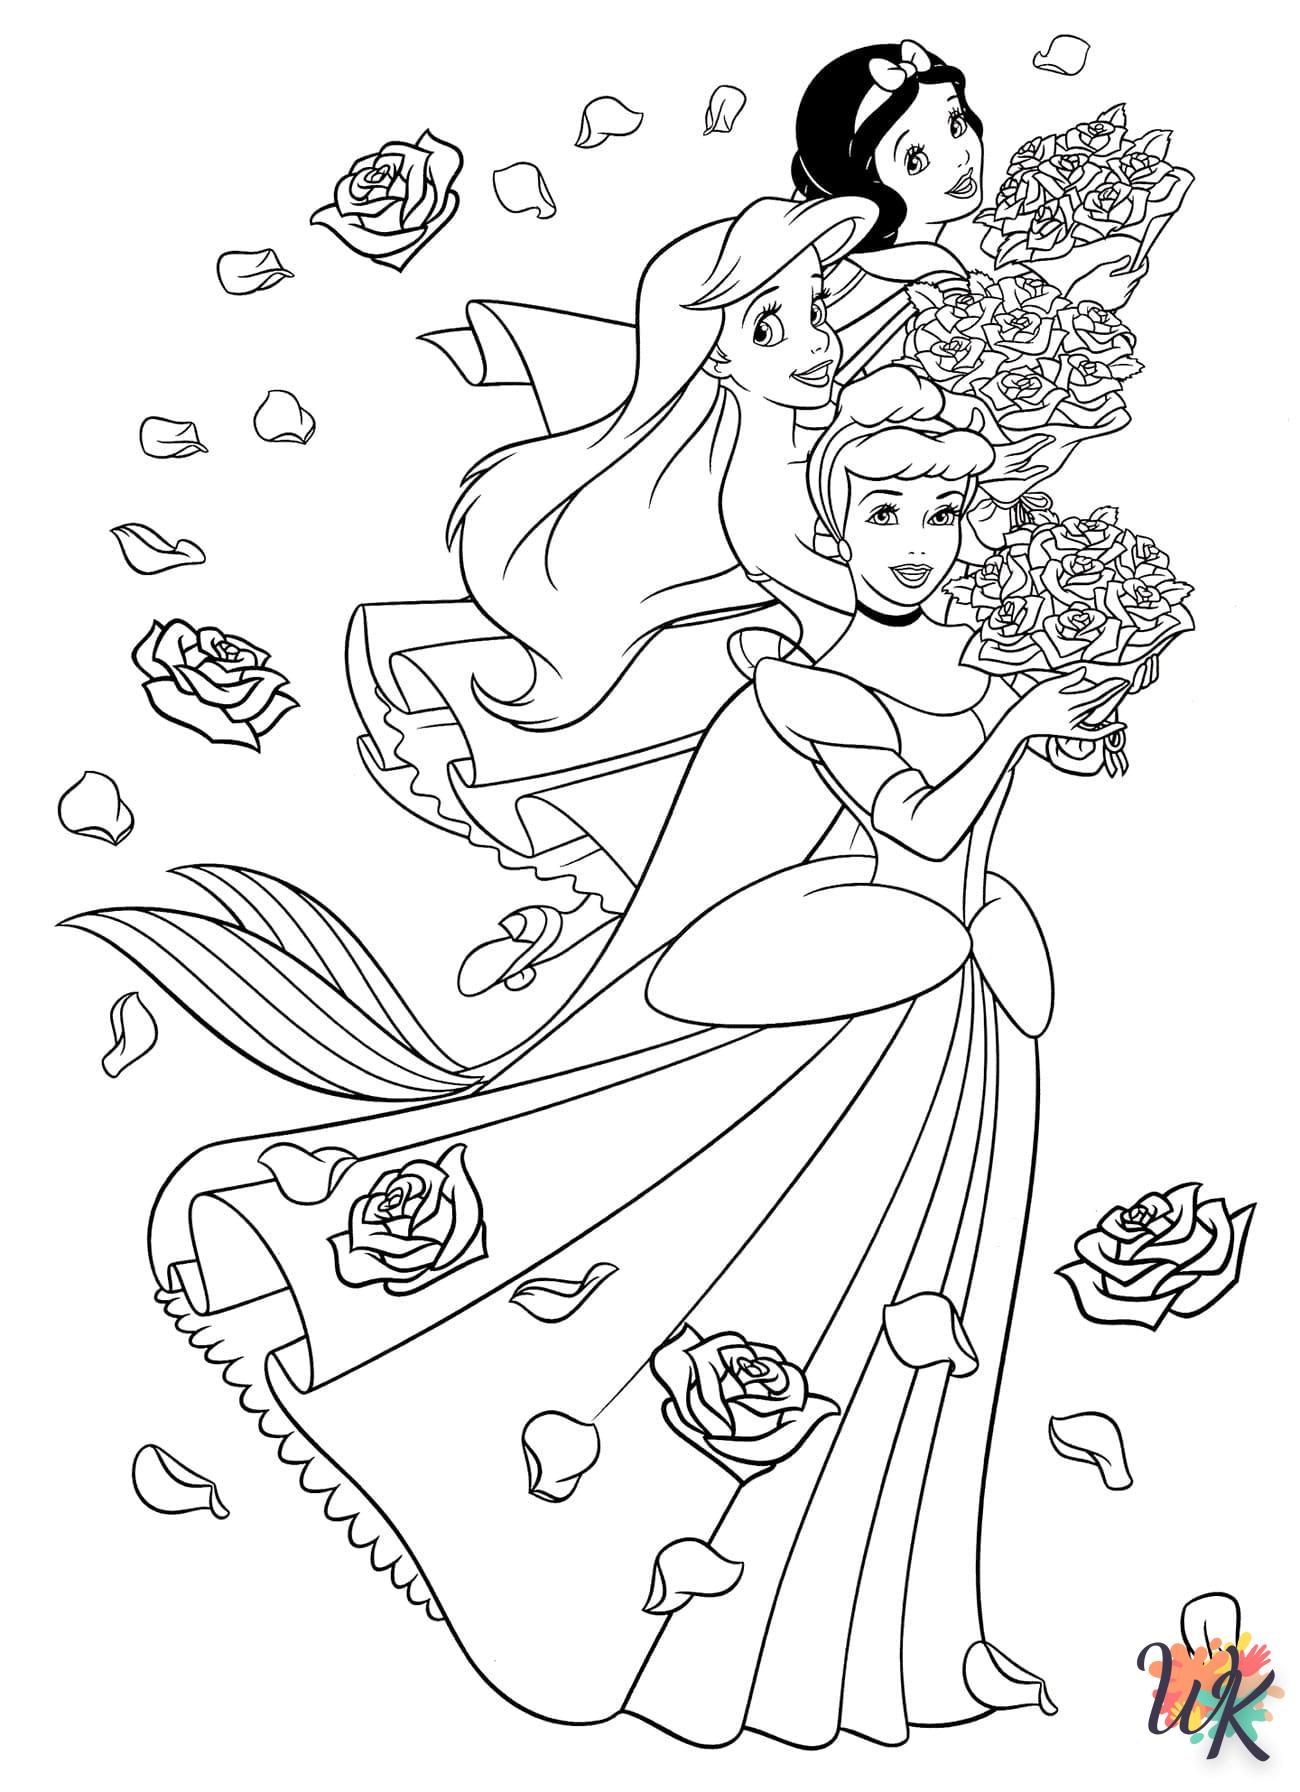 Disney coloring page to print for 10 year olds